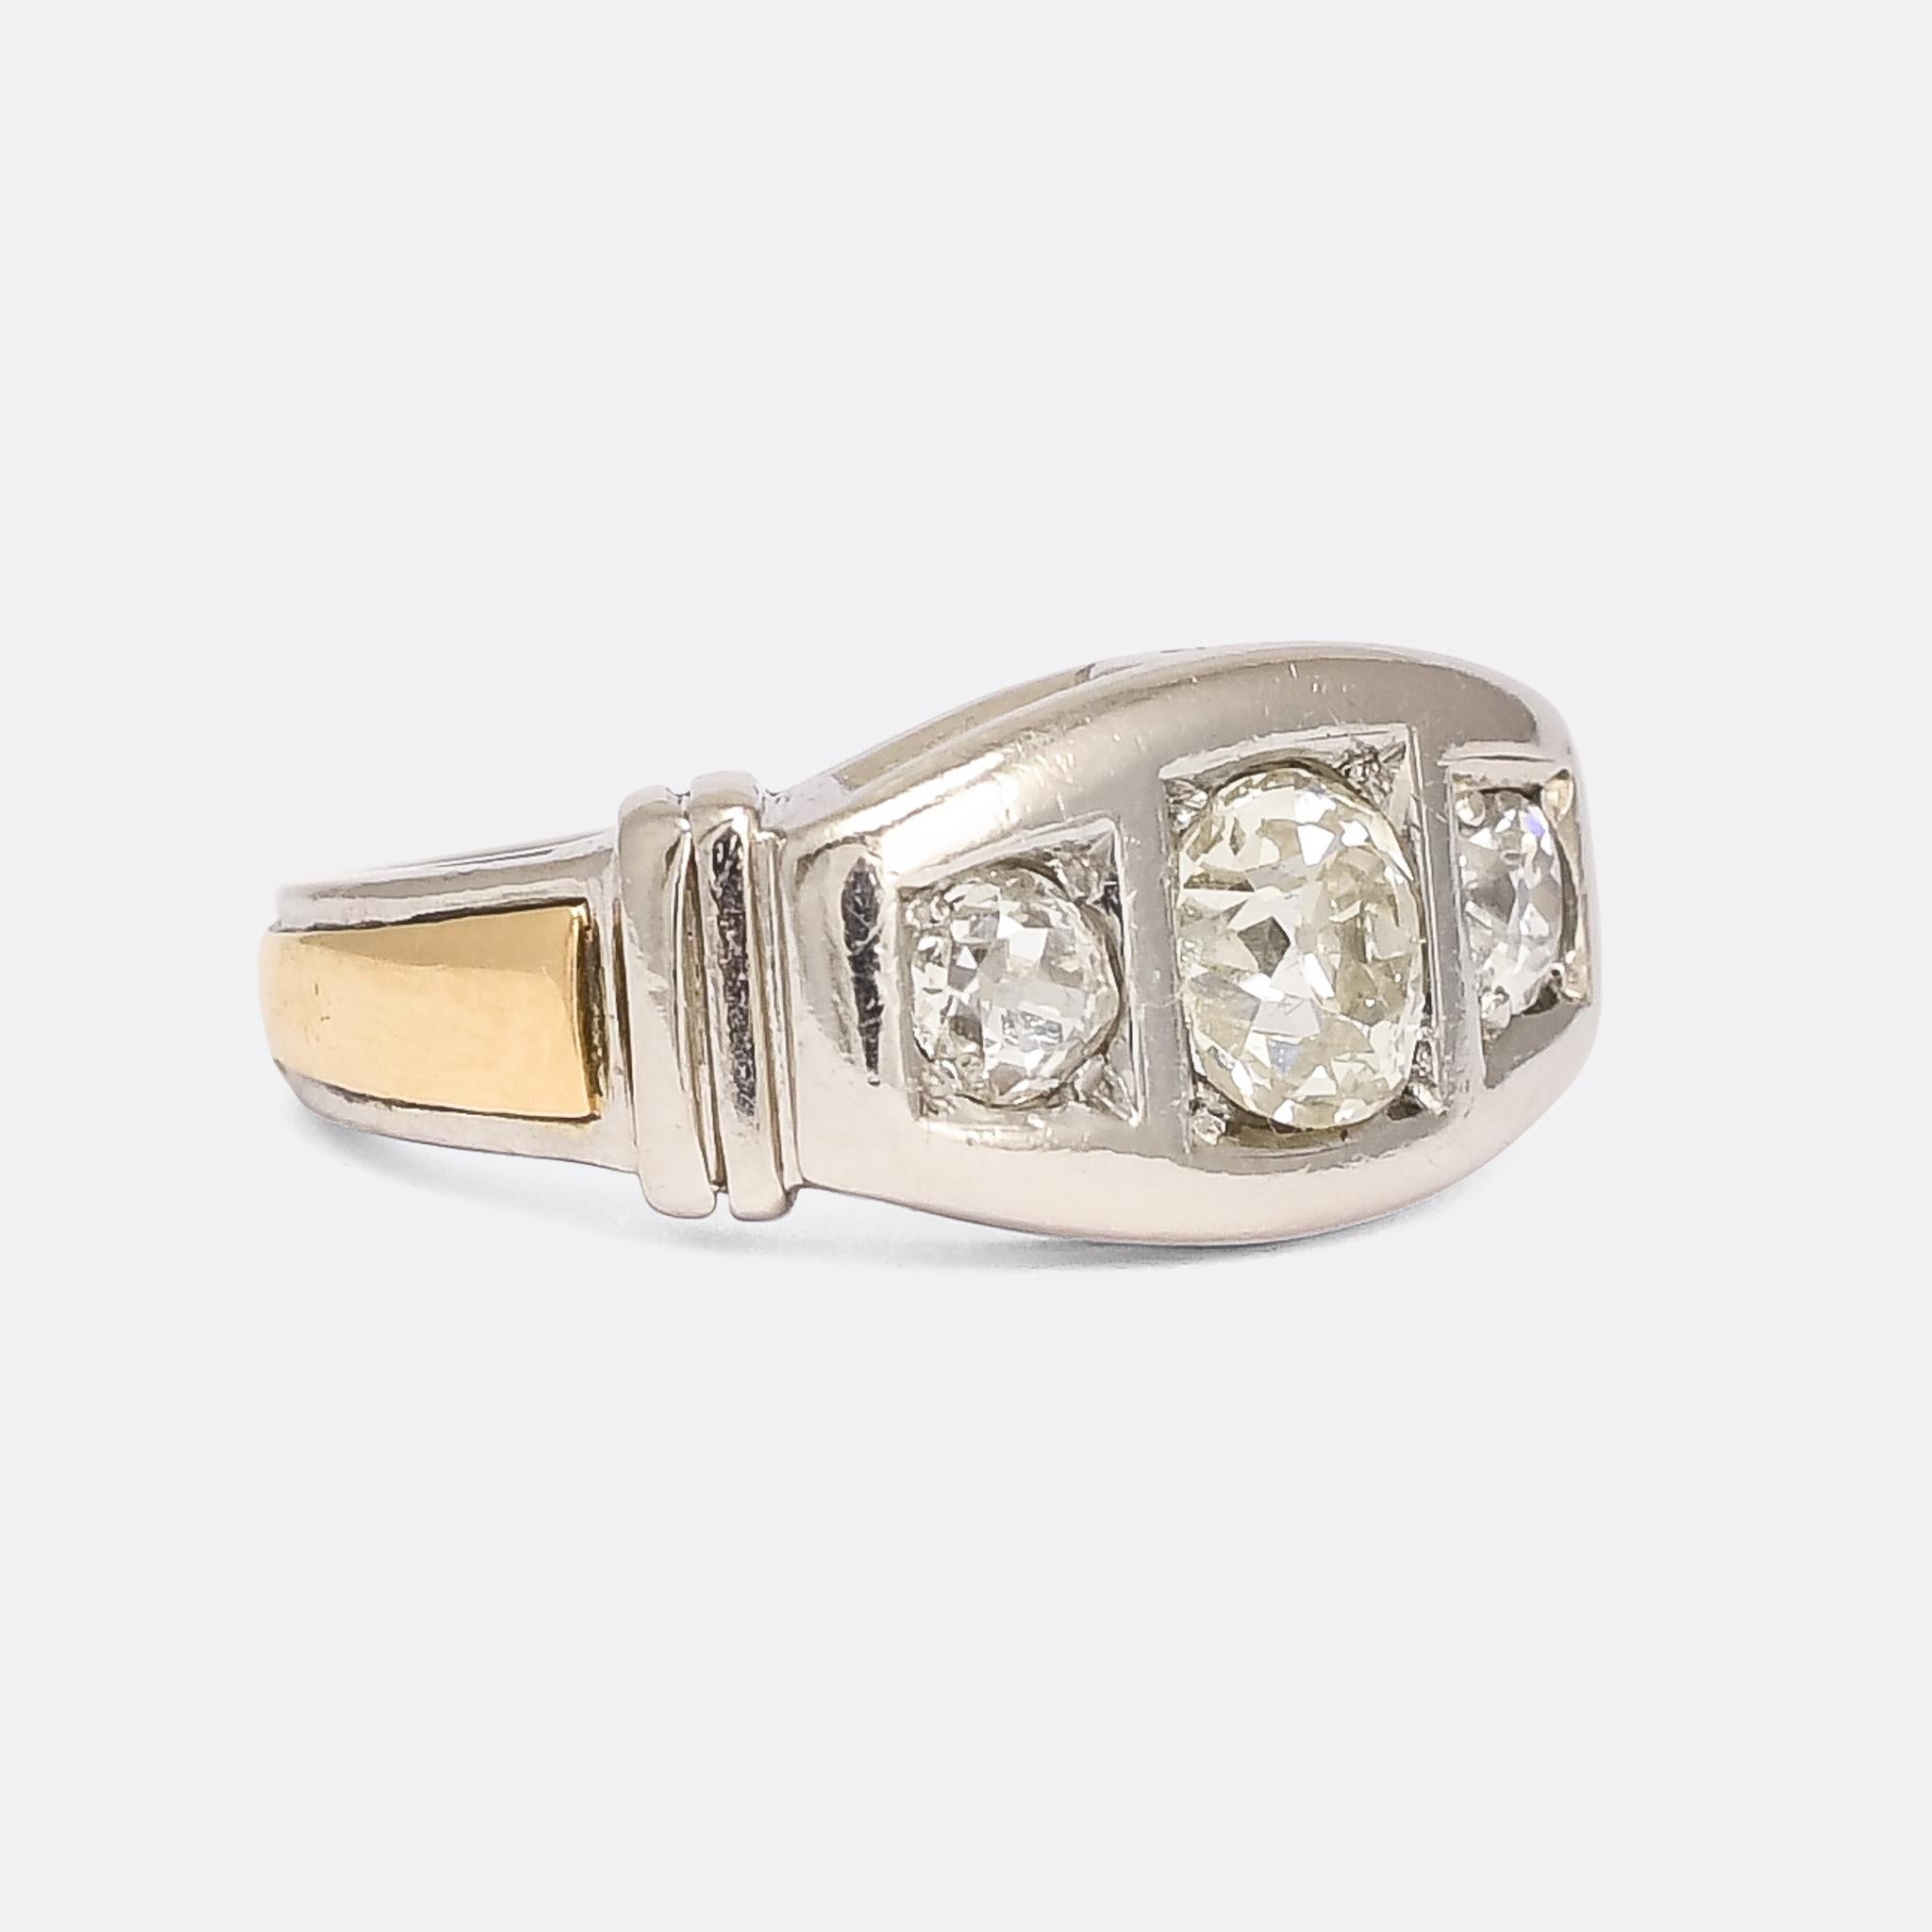 An incredible modernist diamond three-stone ring dating from the 1950s. It's crafted in platinum, with a contrasting 18k gold band around the outer shank, and set with just over 1.30 carats of antique cushion cut diamonds. It's heavy and substantial